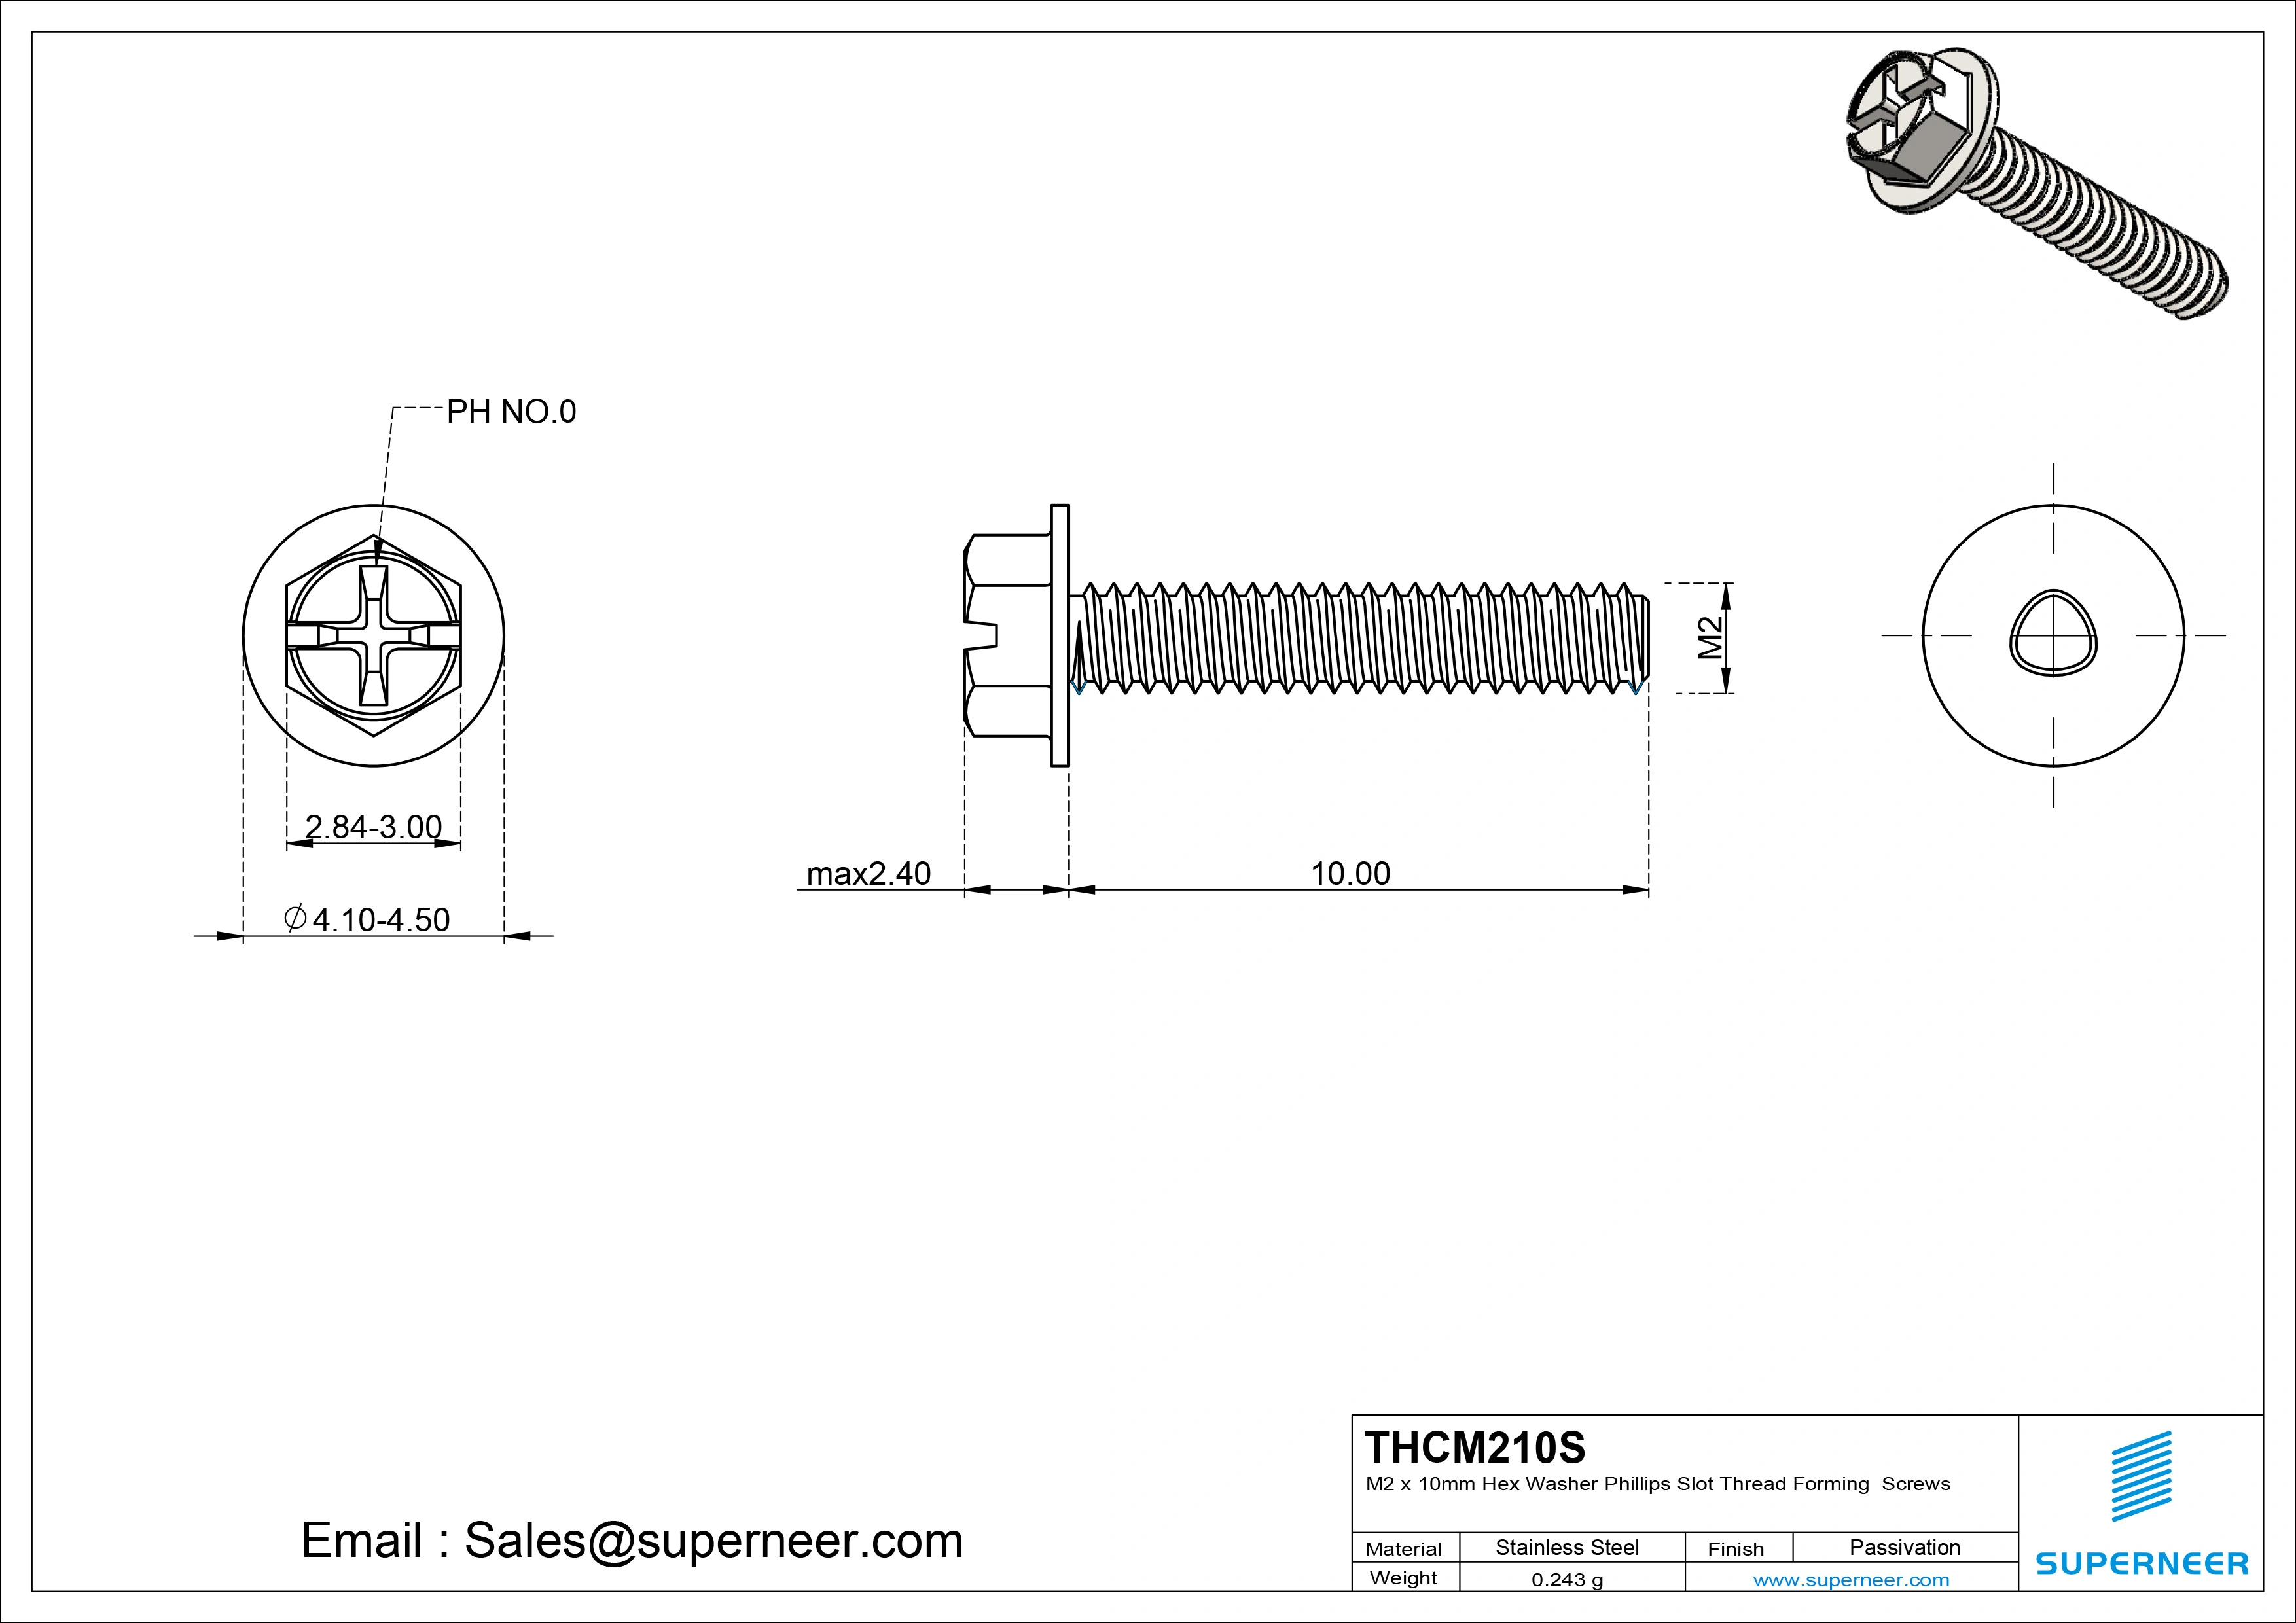 M2 × 10mm Indented Hex Washer Phillips Slot Thread Forming Screws for Metal SUS304 Stainless Steel Inox